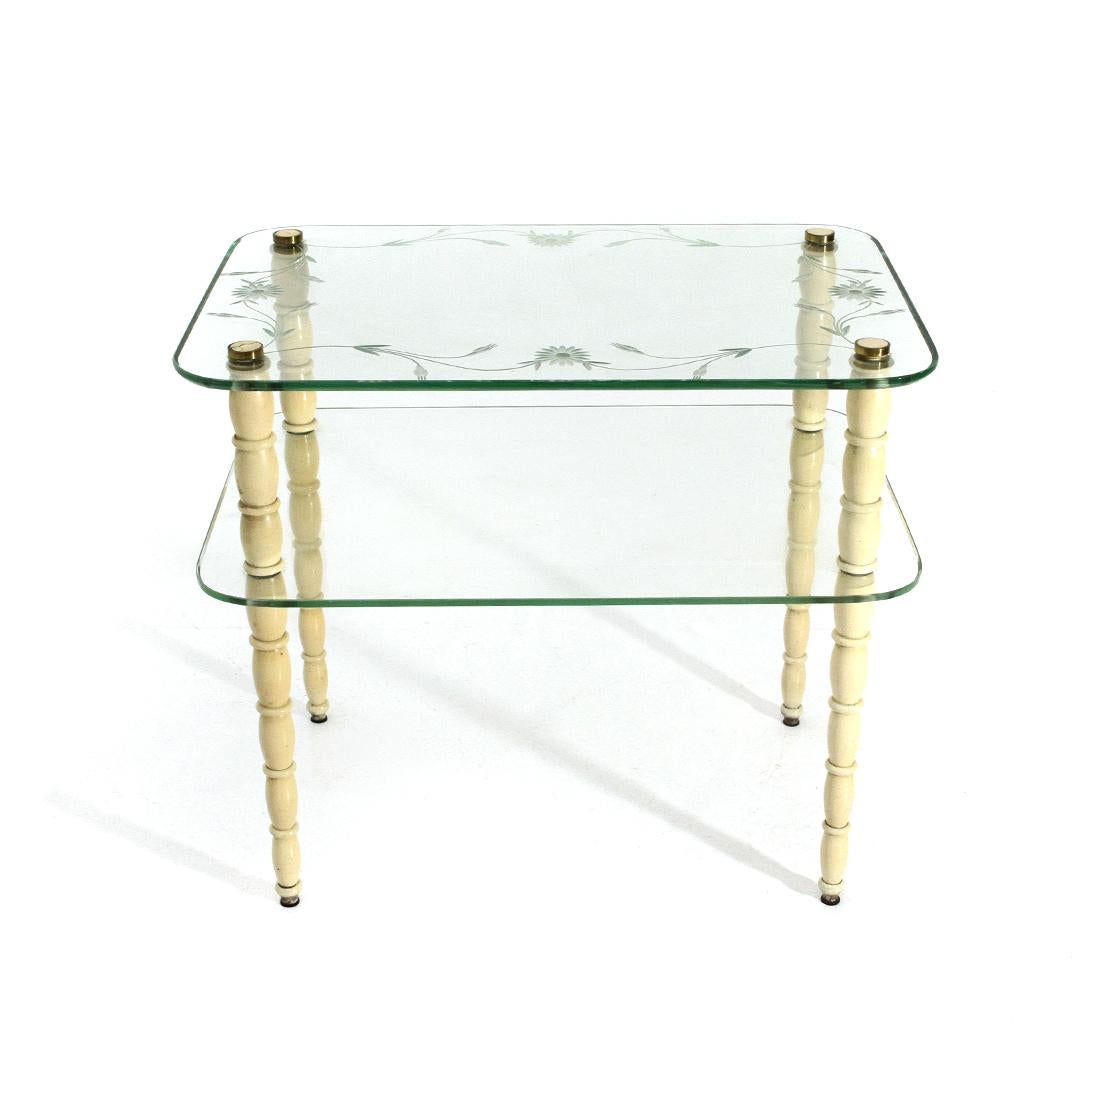 Italian-made coffee table produced in the 1930s.
Legs in shaped wood and white lacquered.
Double glass top with rounded corners.
Extra thick top with rounded edge and floral decorations.
Lacquered wood screws with brass edge.
Good general